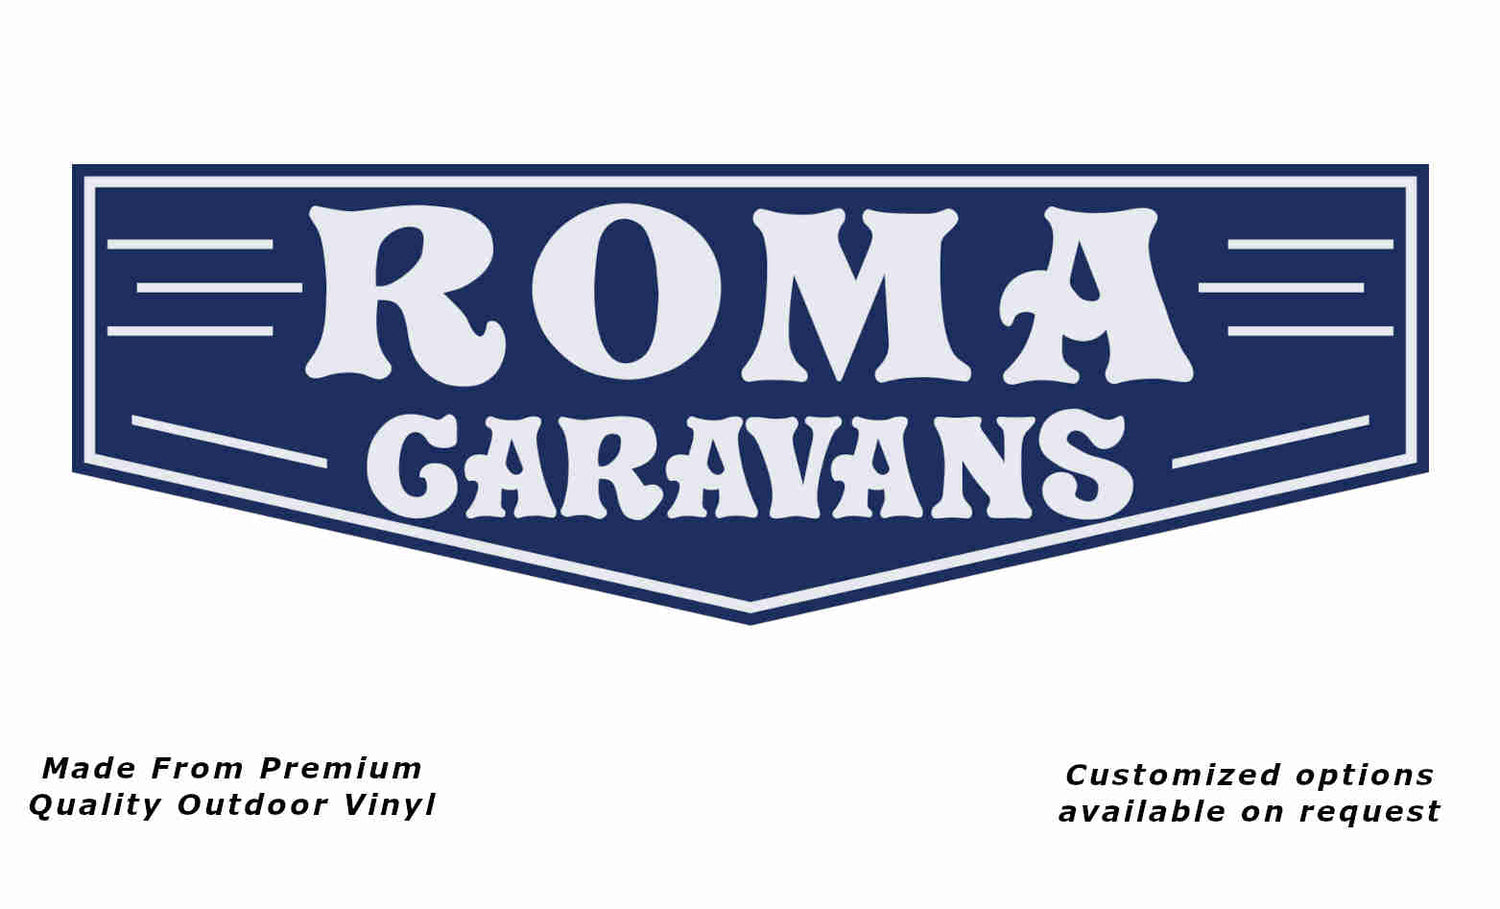 Roma caravans replacement vinyl decal in white and dark blue.